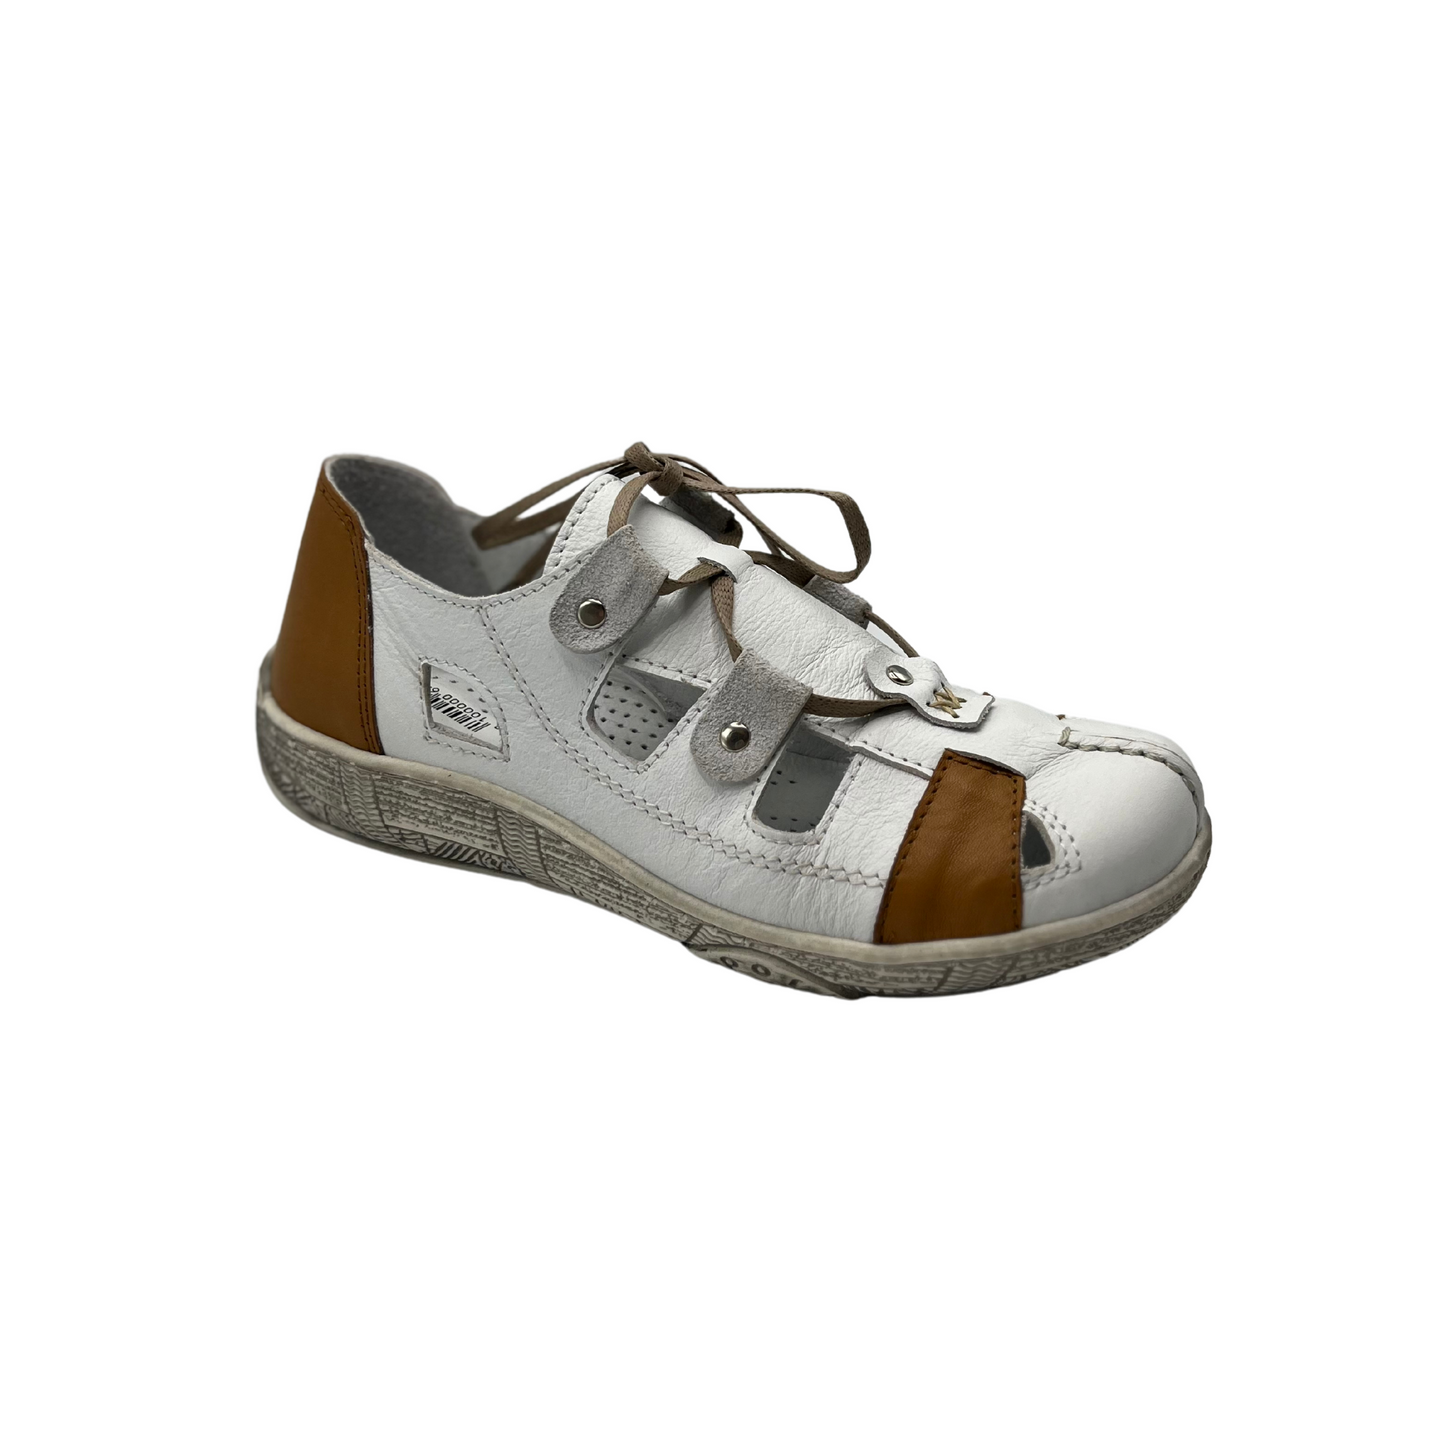 Roamers Hilda in white/tan colour with front lacings.